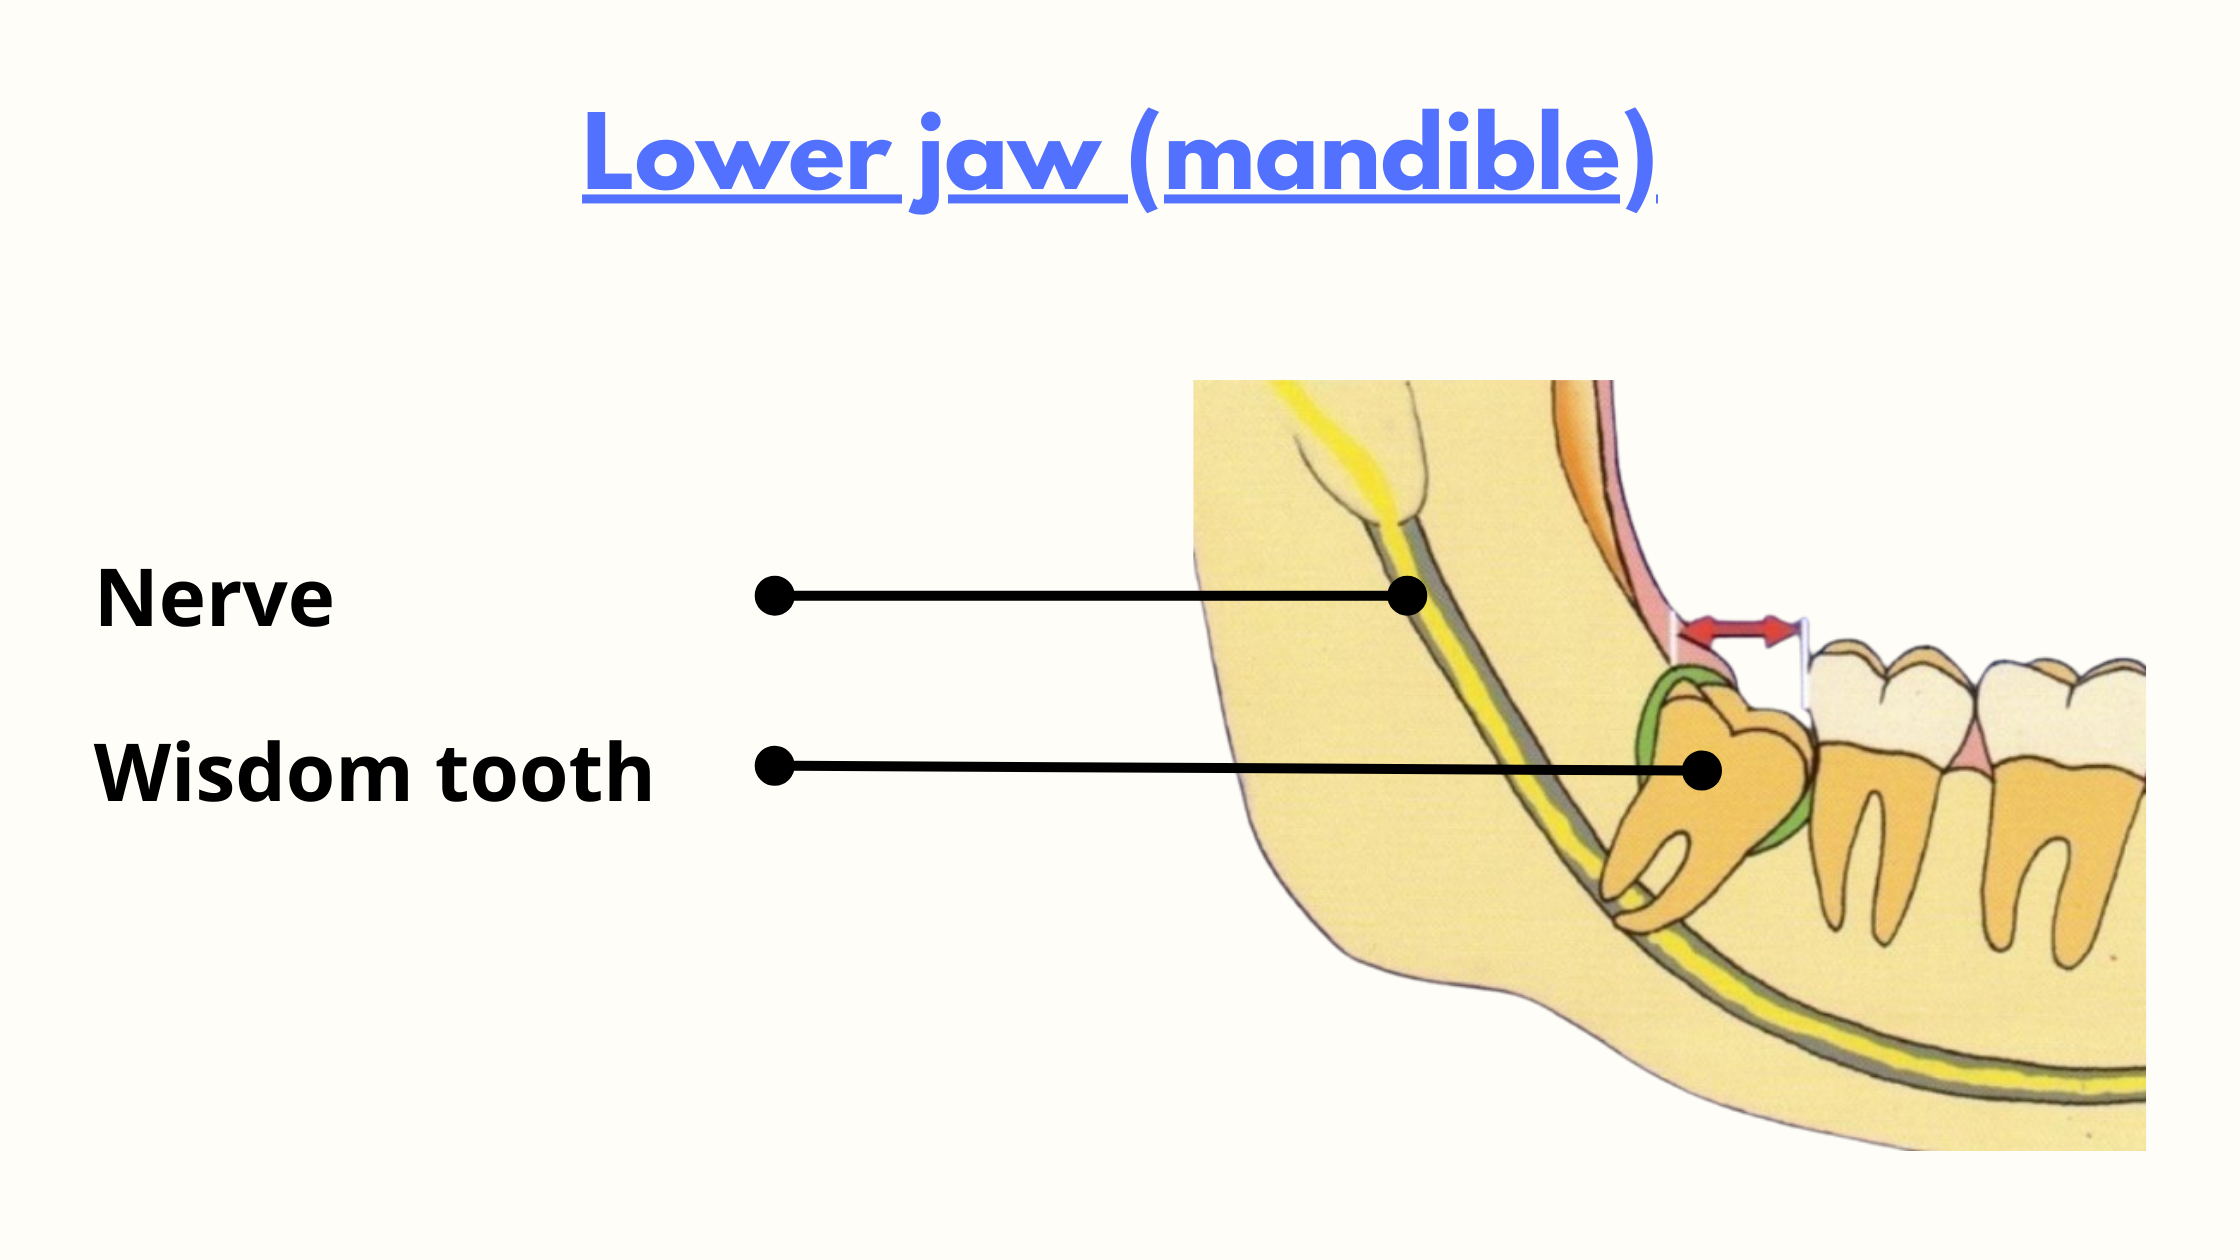 lower wisdom teeth carry a higher risk of nerve damage during the extraction procedure